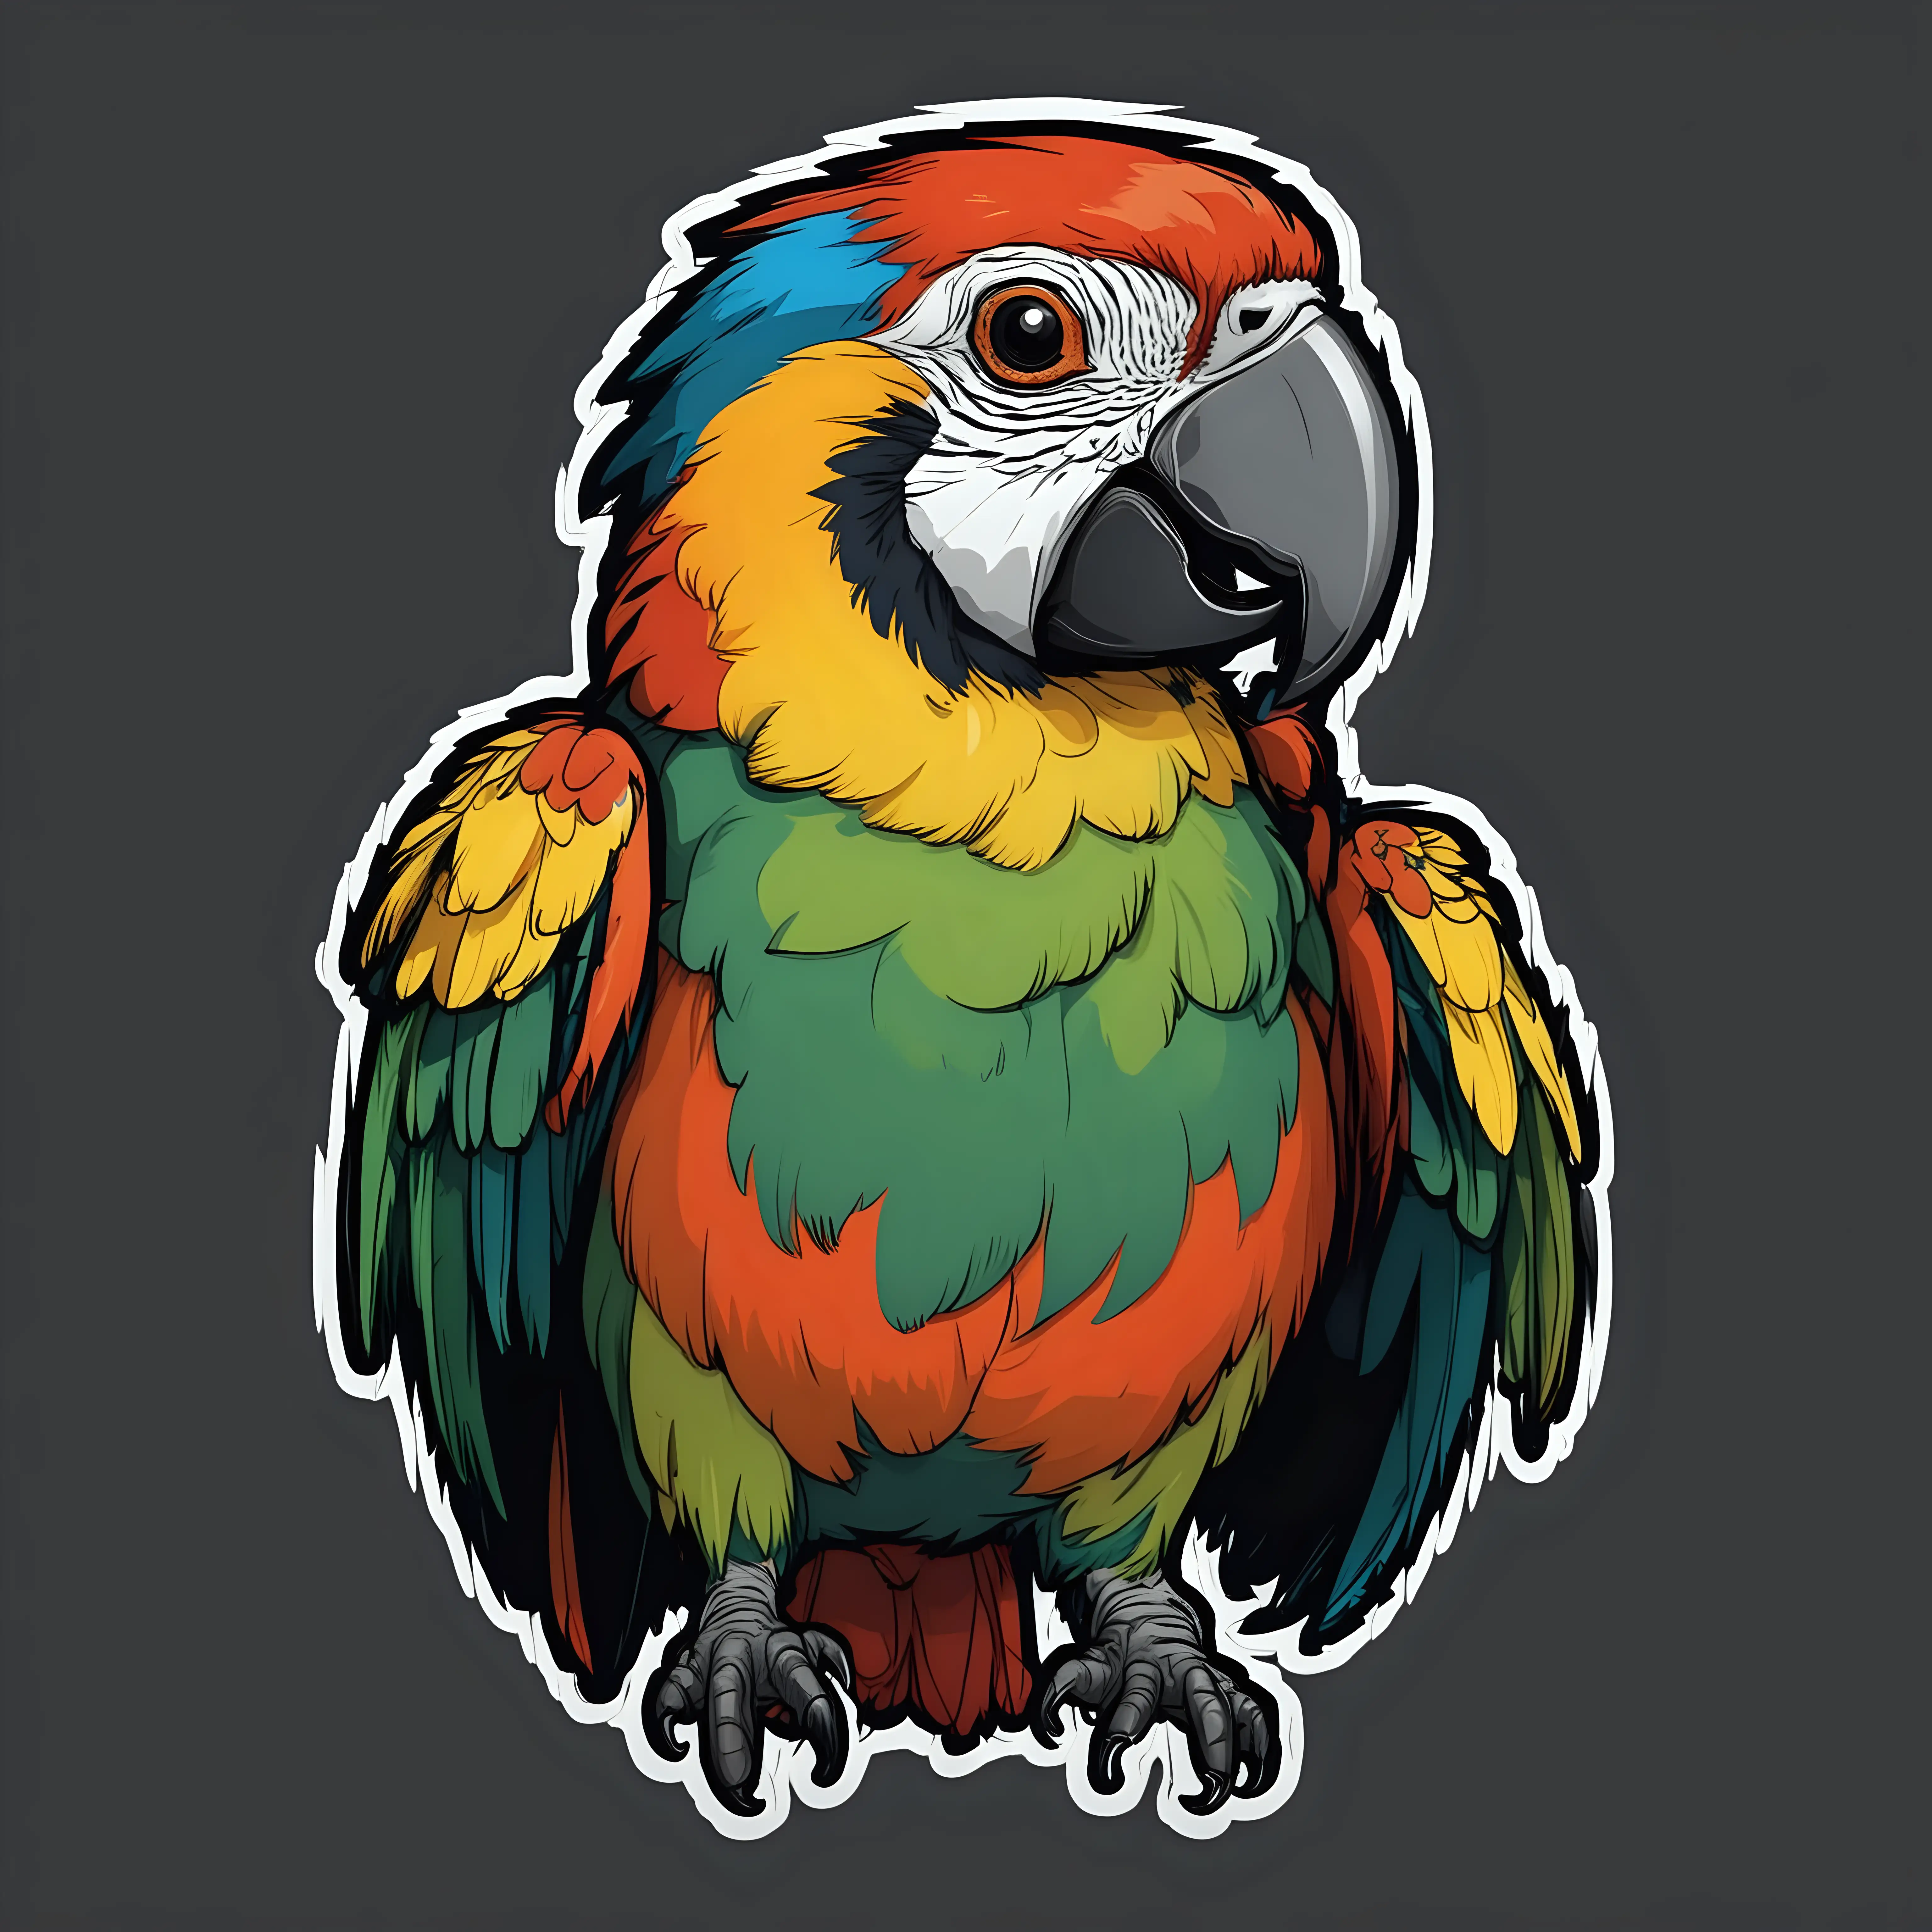 Exaggerated FullBody Parrot Caricature Sticker with Bold Outlines on Black Background